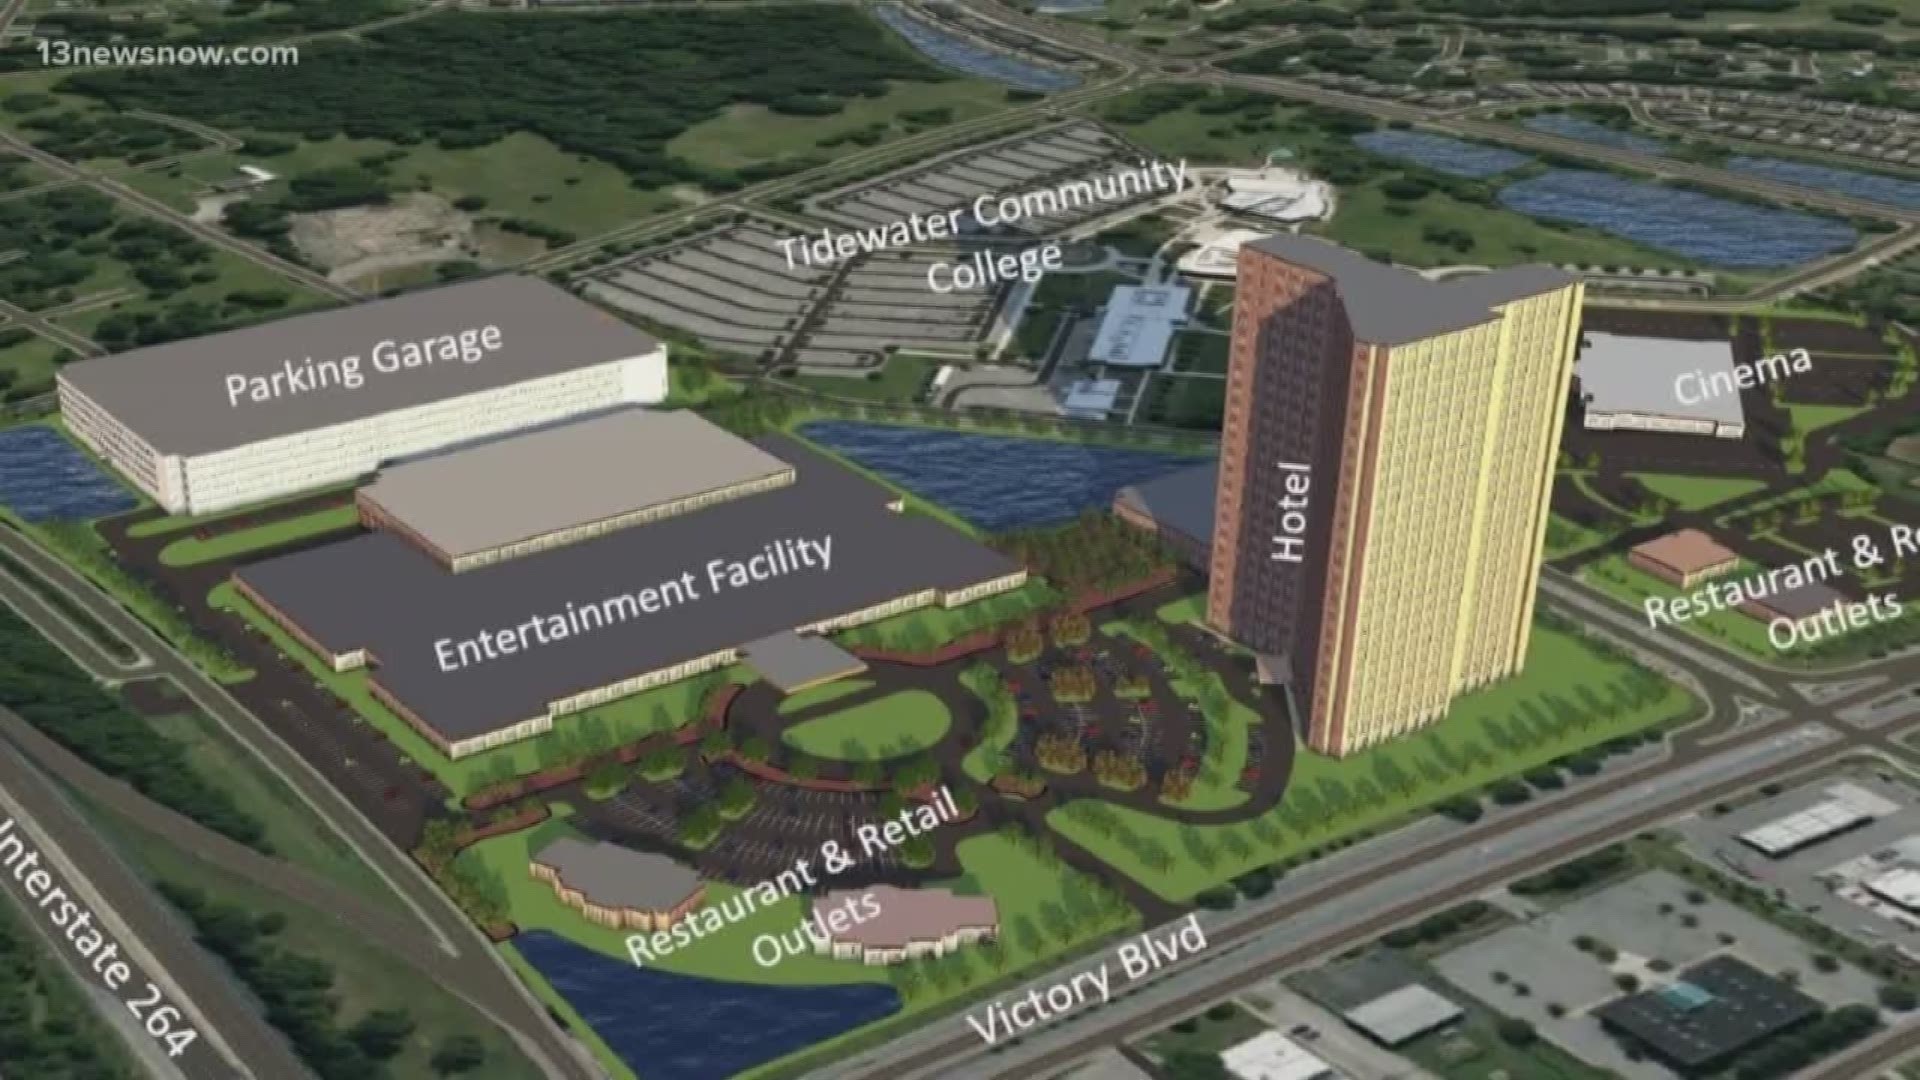 City council voted to approve the development of an entertainment district. It would include casino gaming. The city announced a partnership with Rush Street Gaming.